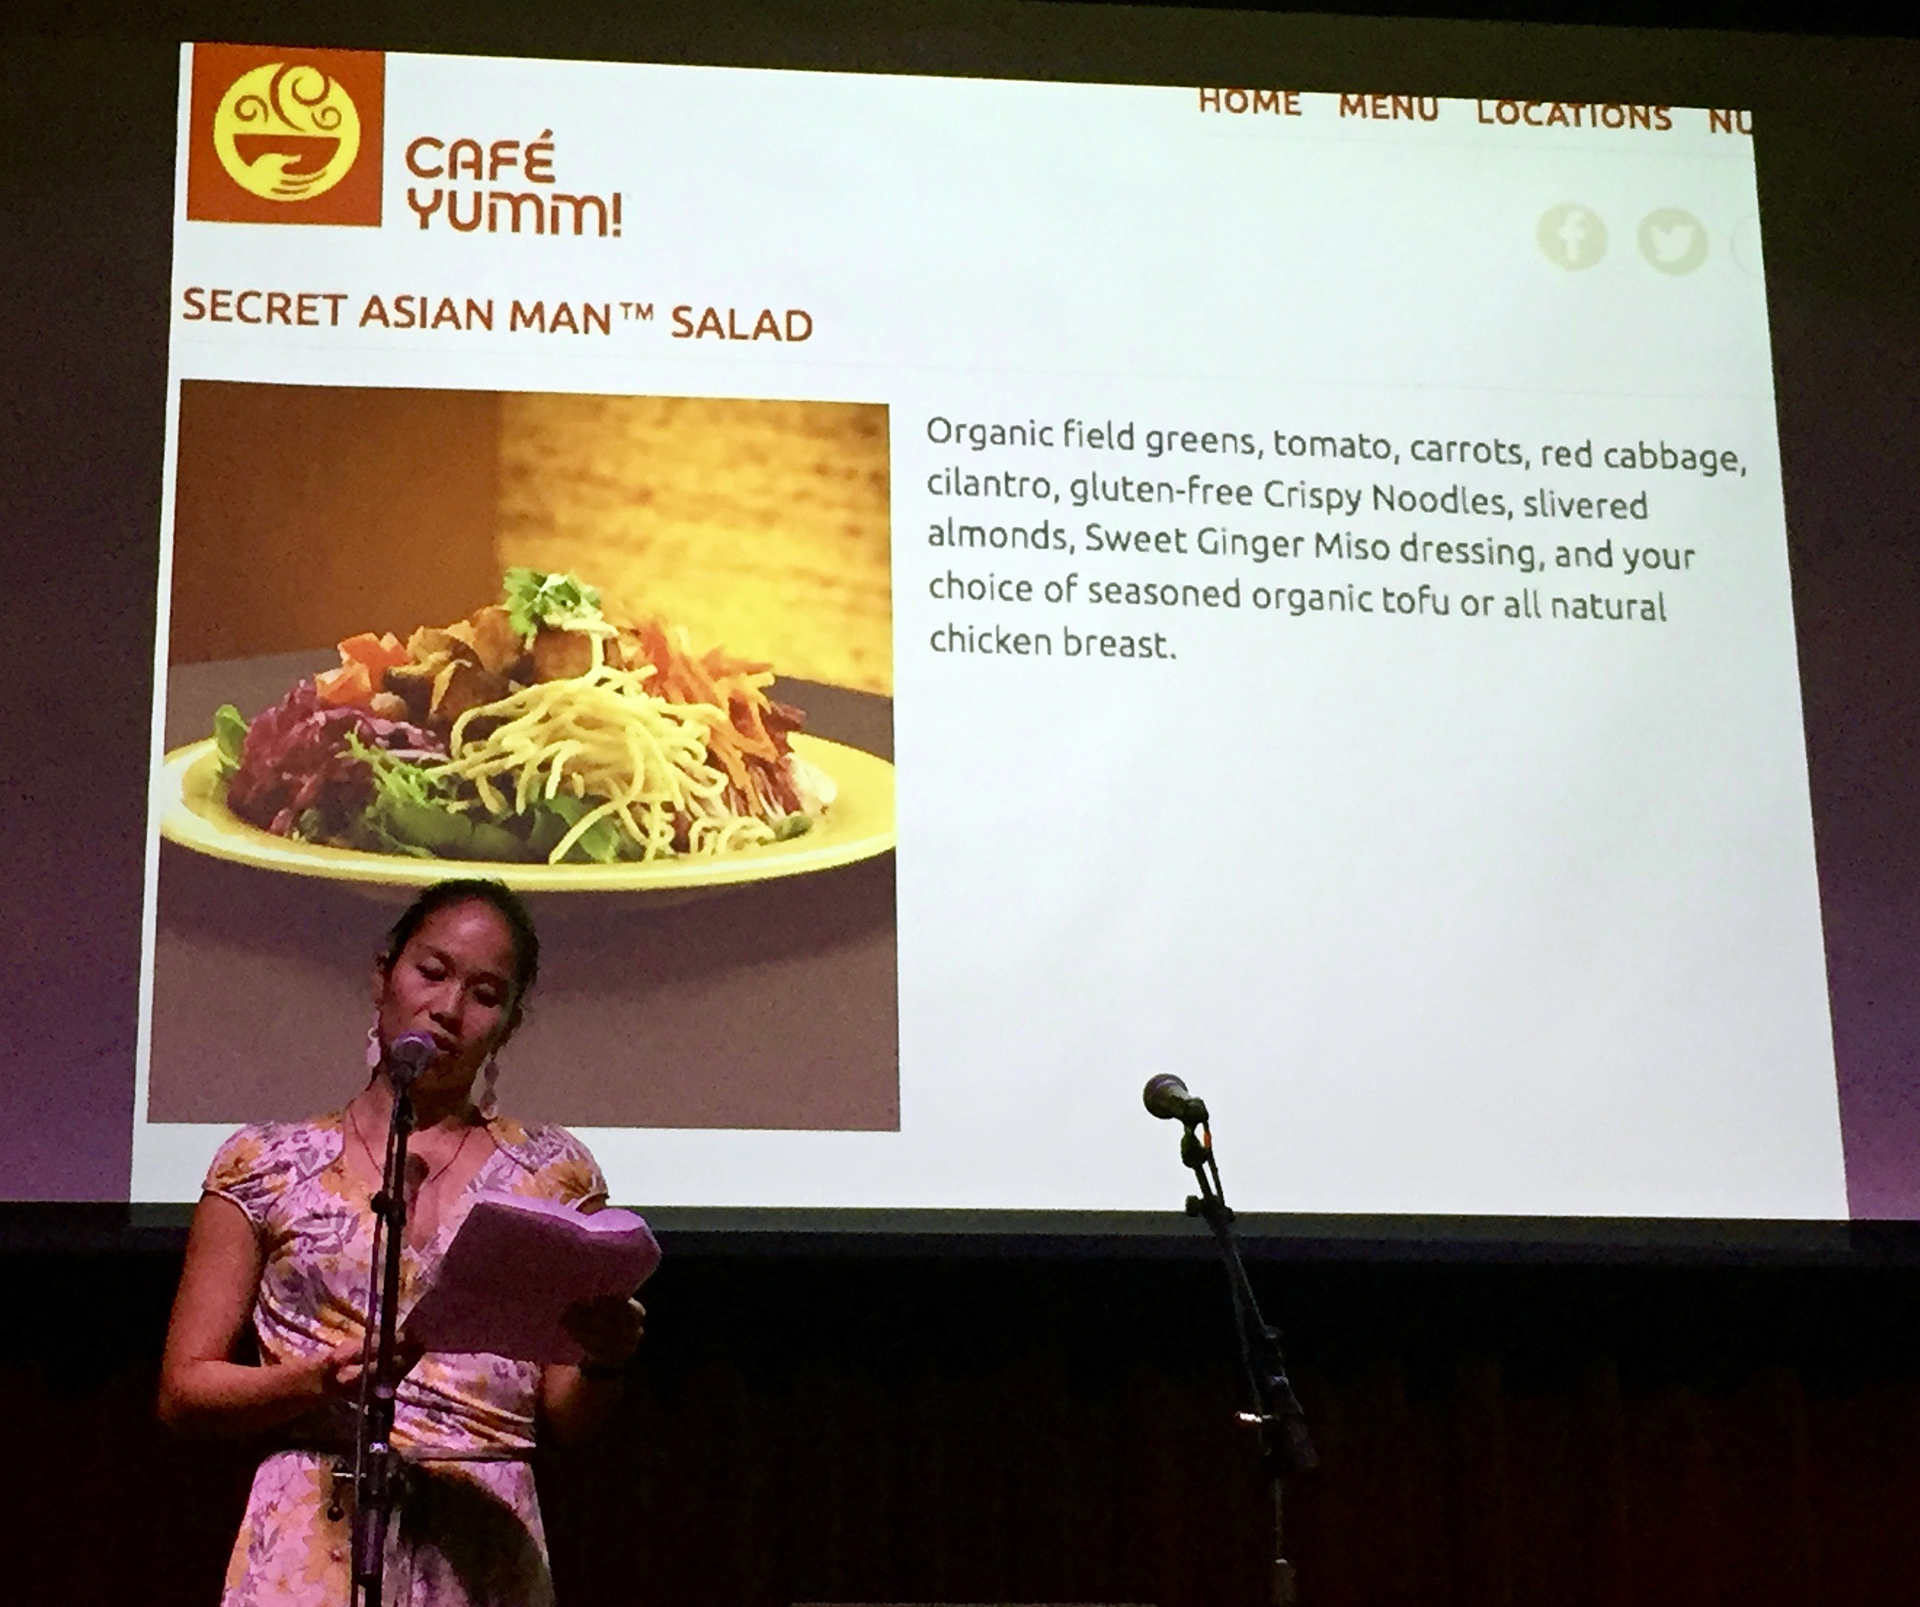 Bonnie Tsui showed some of the offensive names used for the supposedly "Asian salad" that is a mainstay on restaurant menus all over the country.